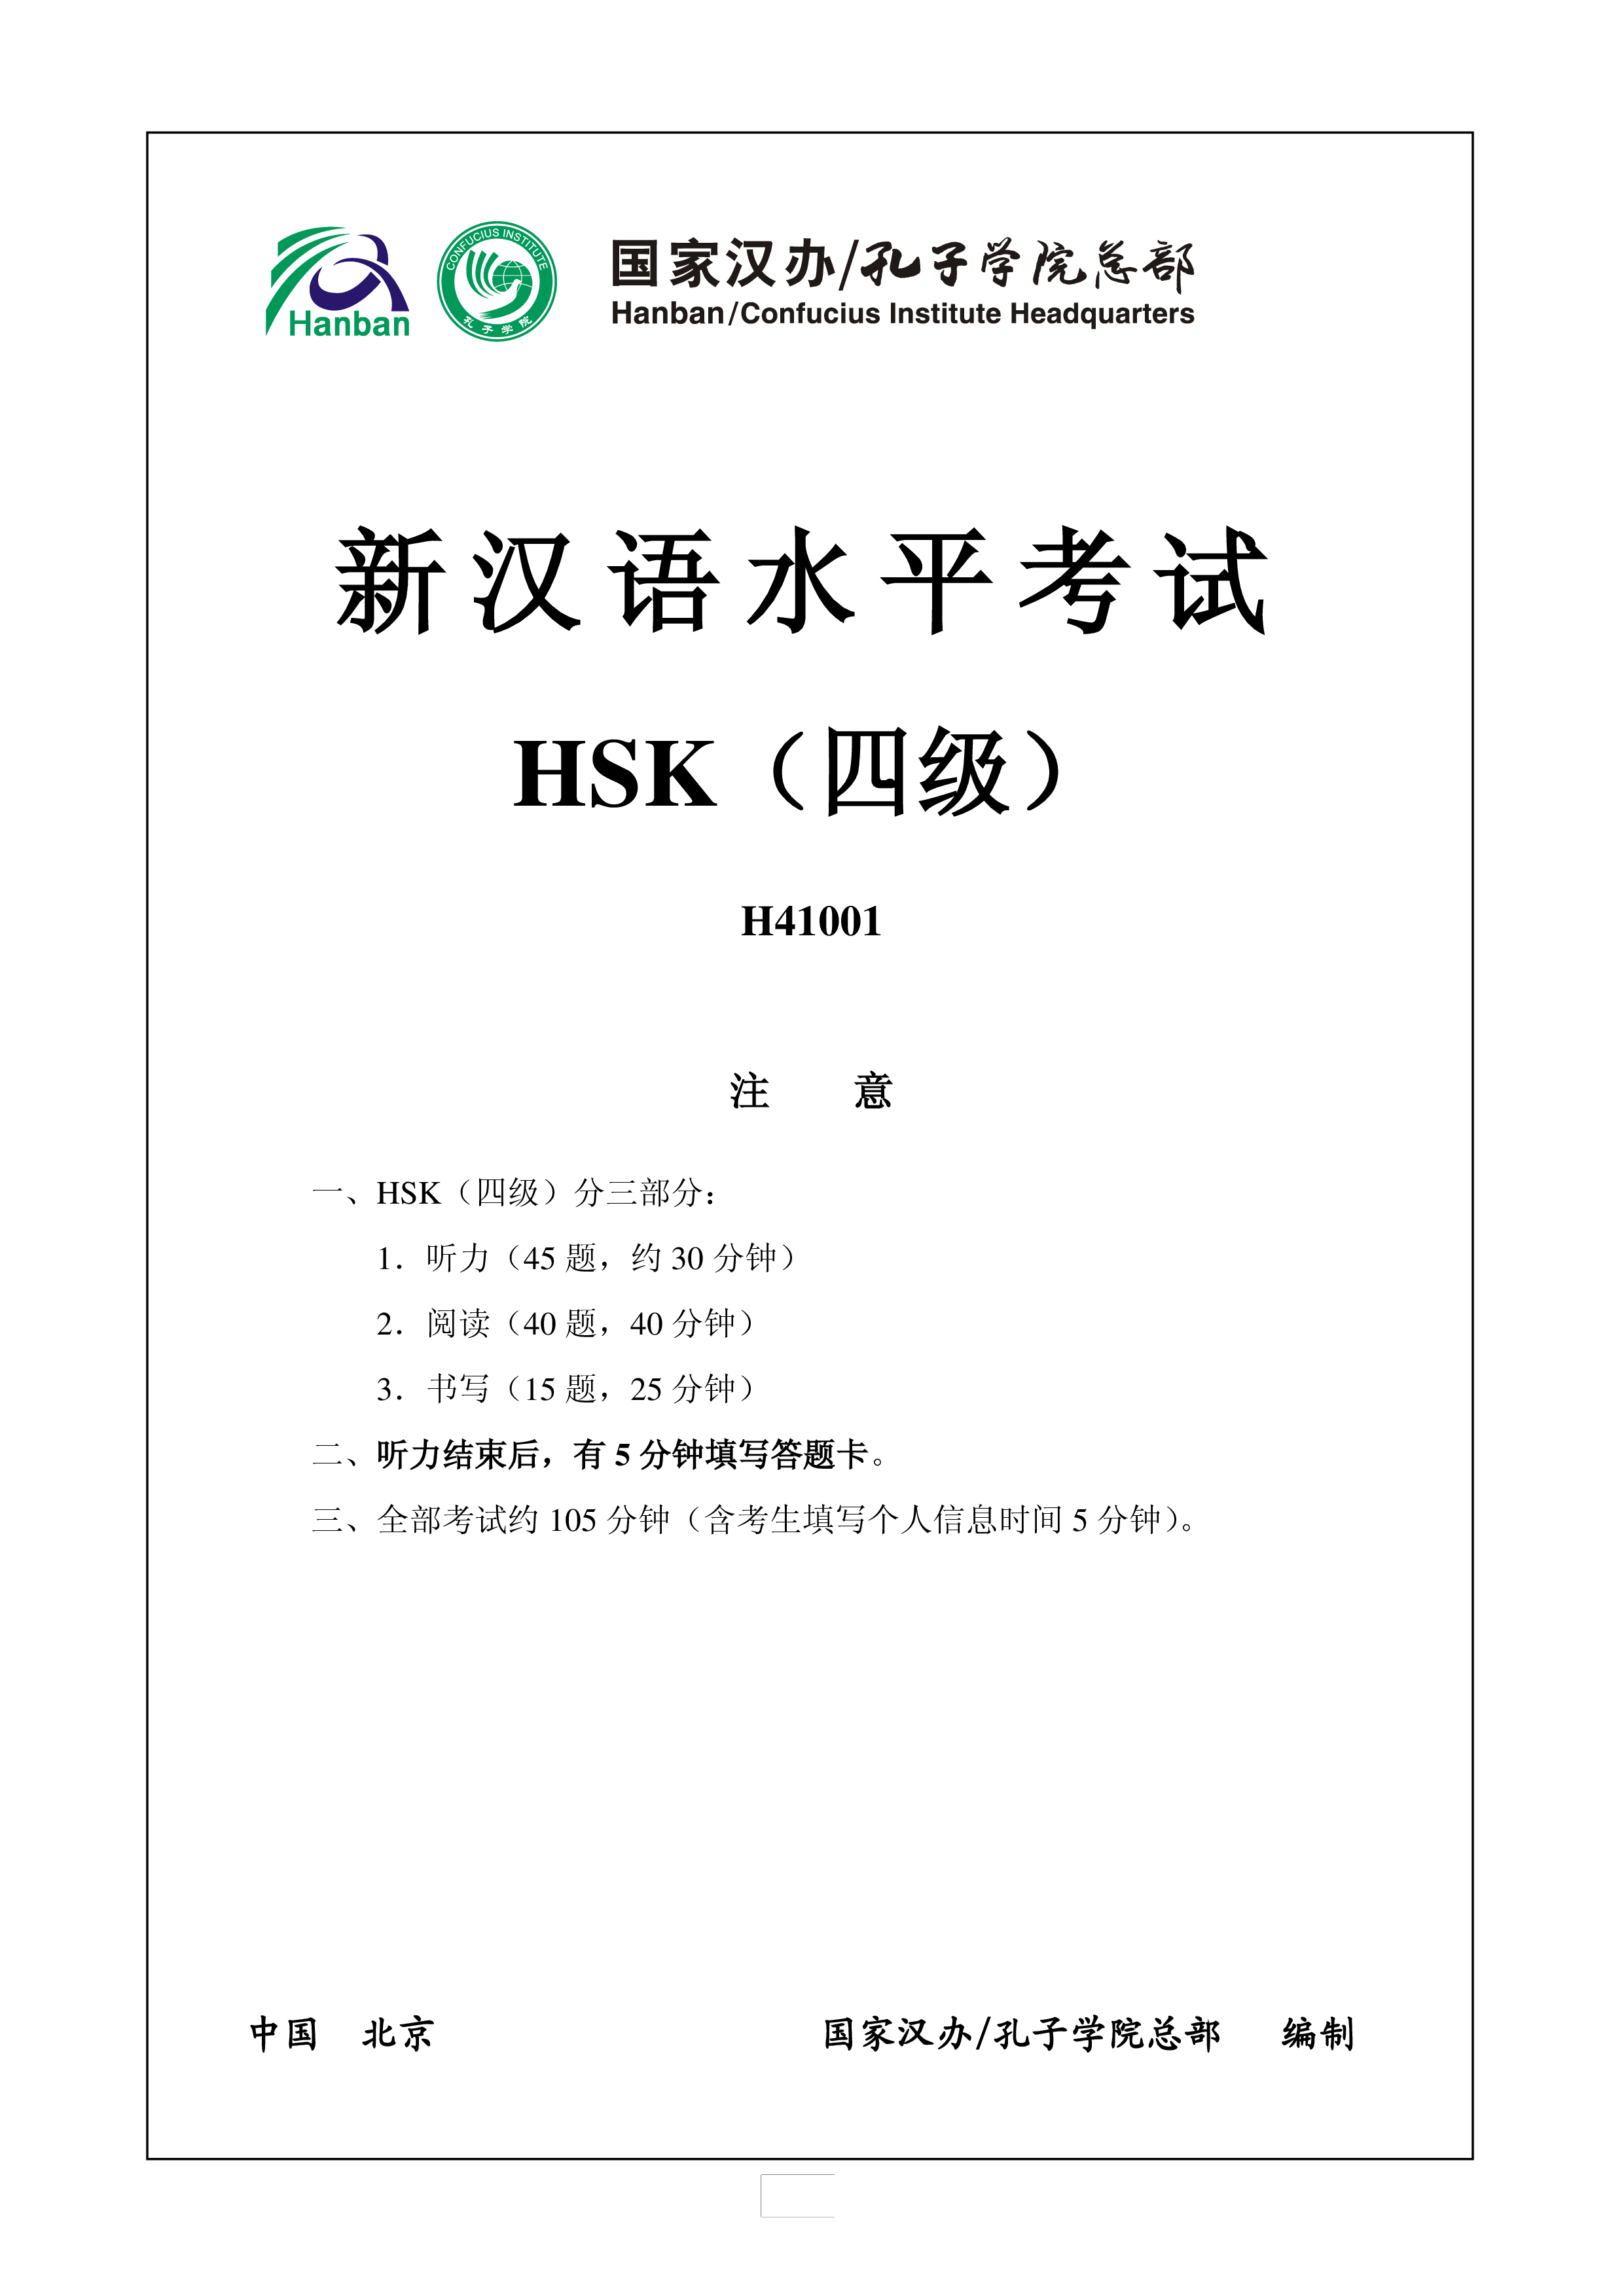 hsk4 chinese exam including answers # hsk h41001 plantilla imagen principal